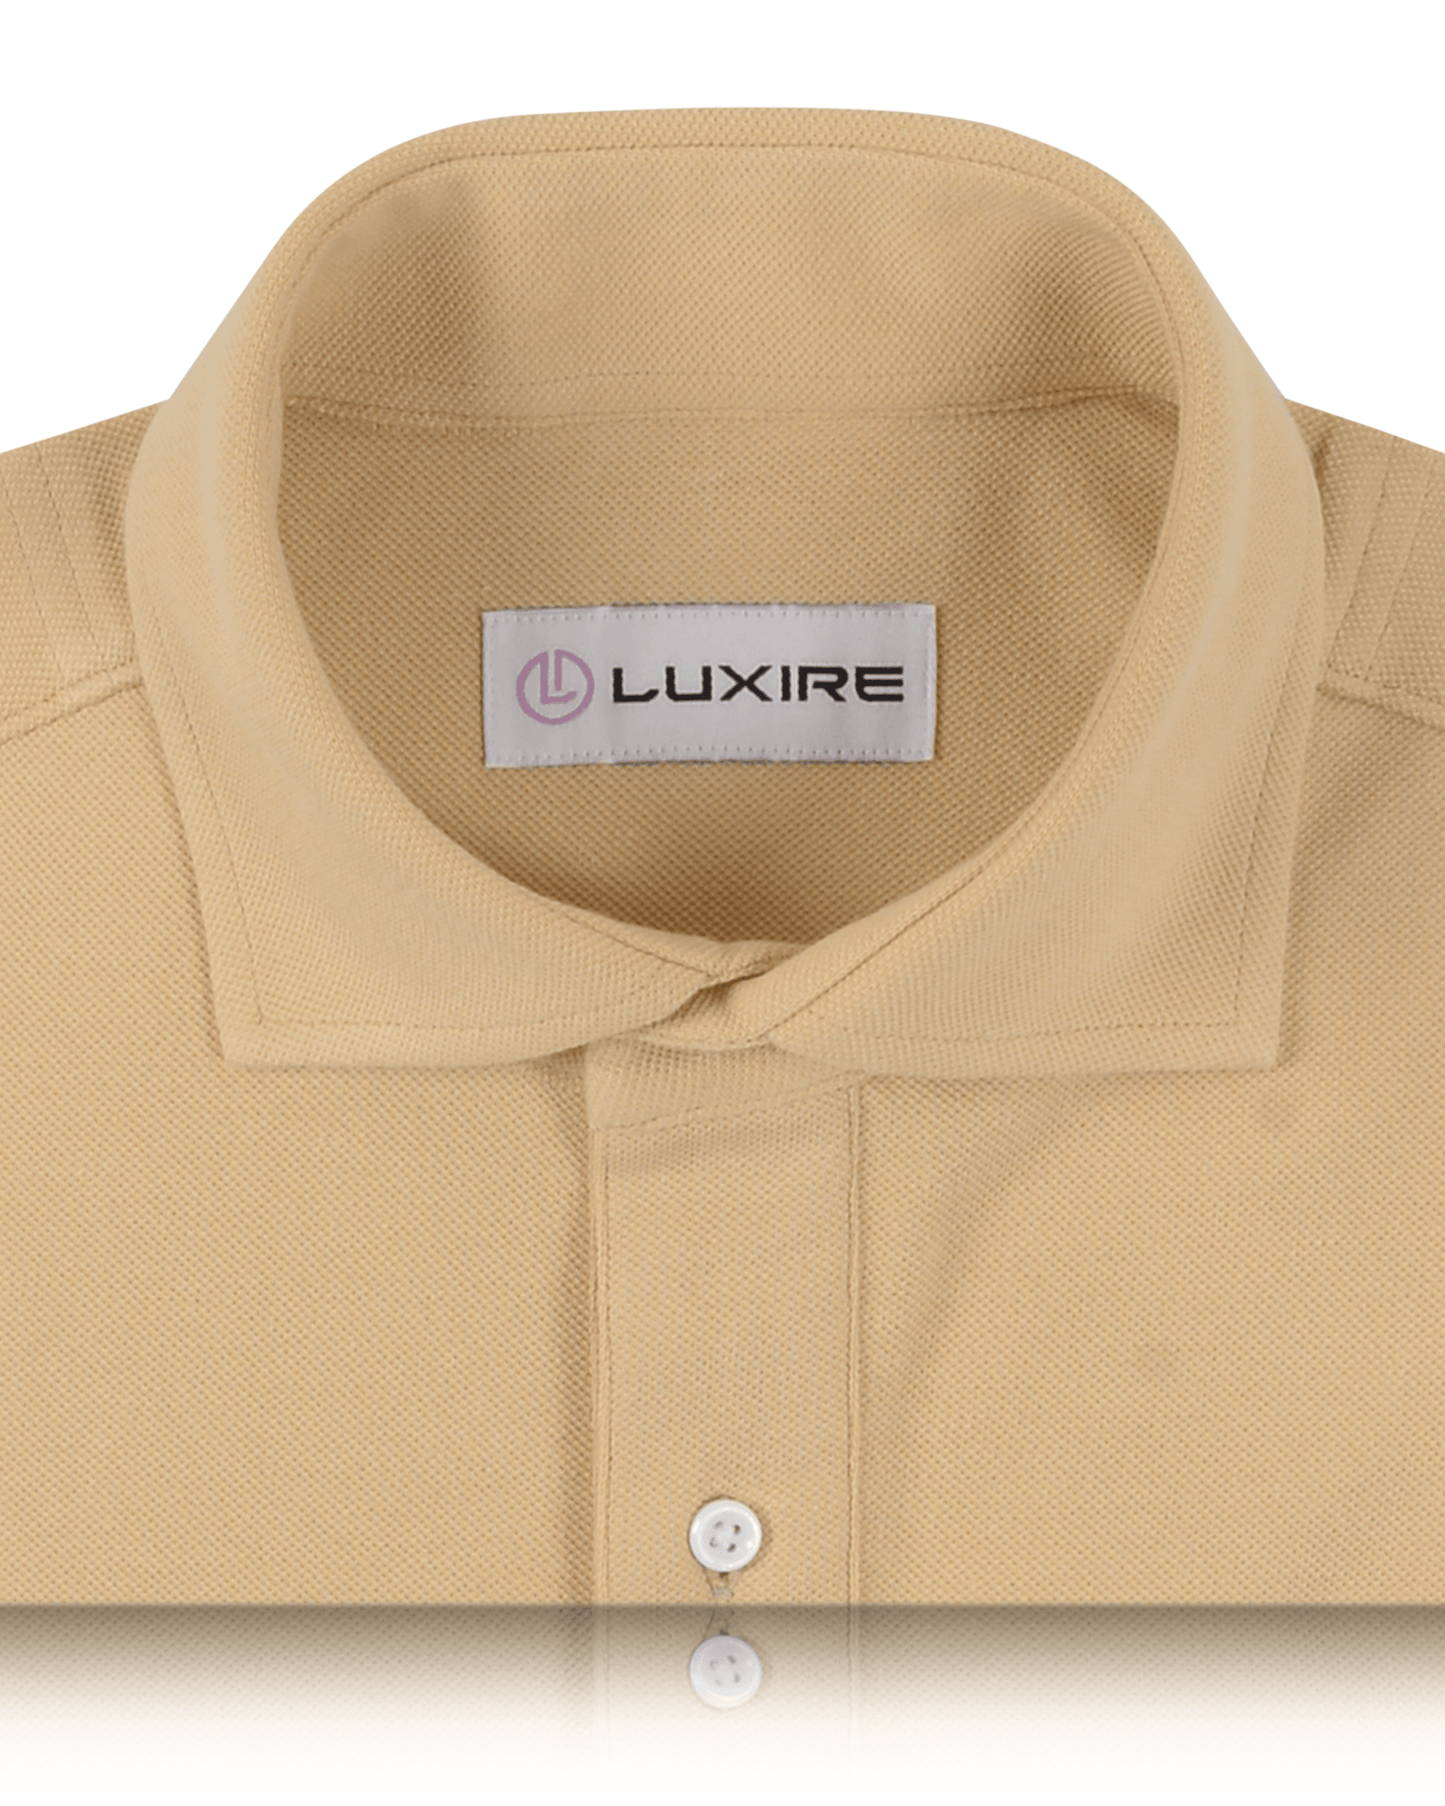 Collar of the custom oxford polo shirt for men by Luxire in light sand